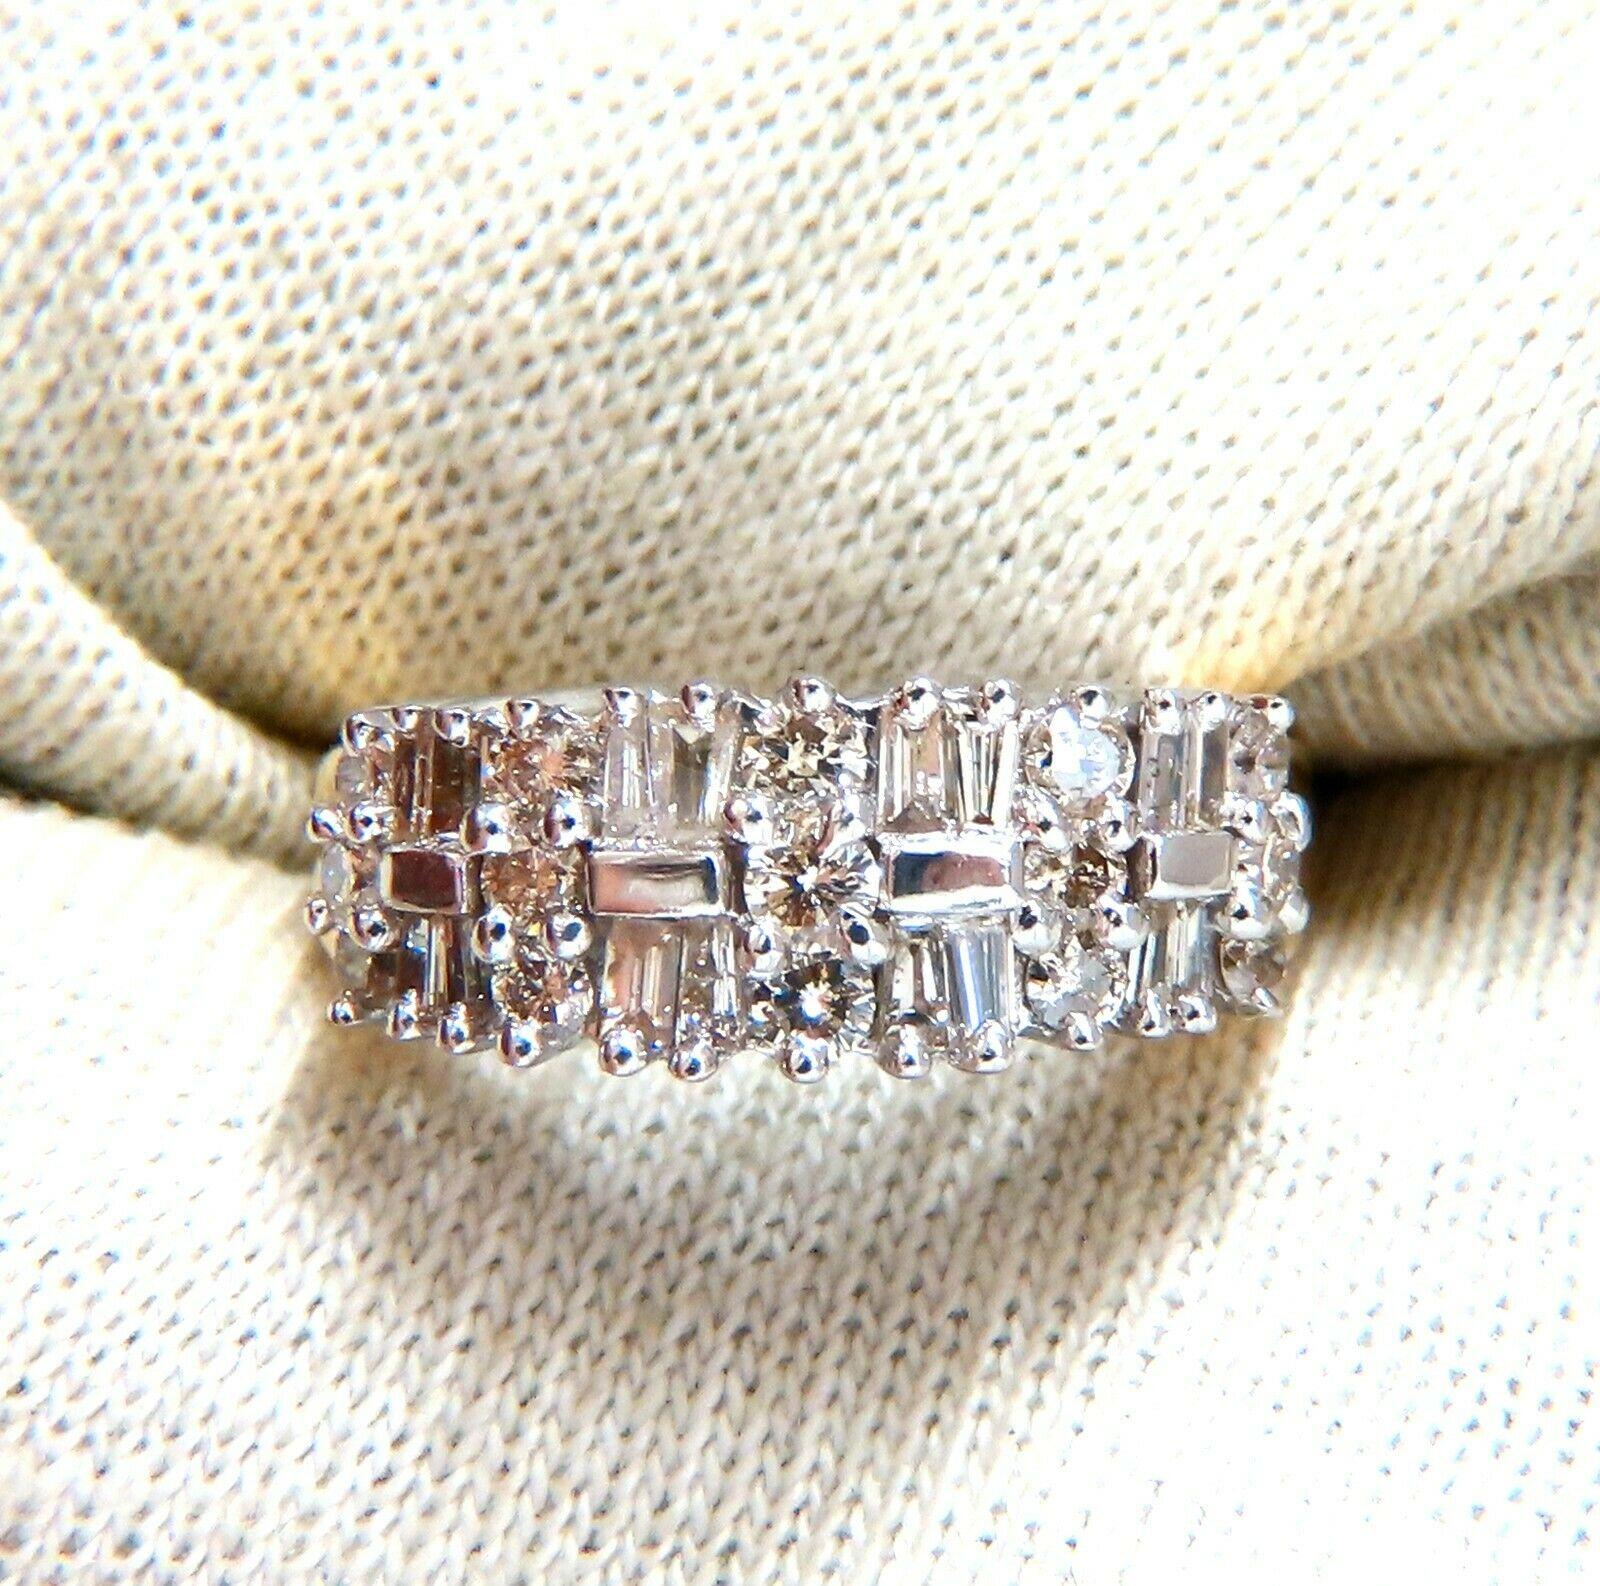 Cluster Row Baguette & Rounds Band.

1.35ct. Natural brilliant diamonds

Durable Built.

Si-2 clarity J color.

14kt yellow gold.

5.8 Grams

Overall ring: 7.8mm wide

Depth: 6.2mm

Current ring size: 7

Appraisal to accompany $3500

May